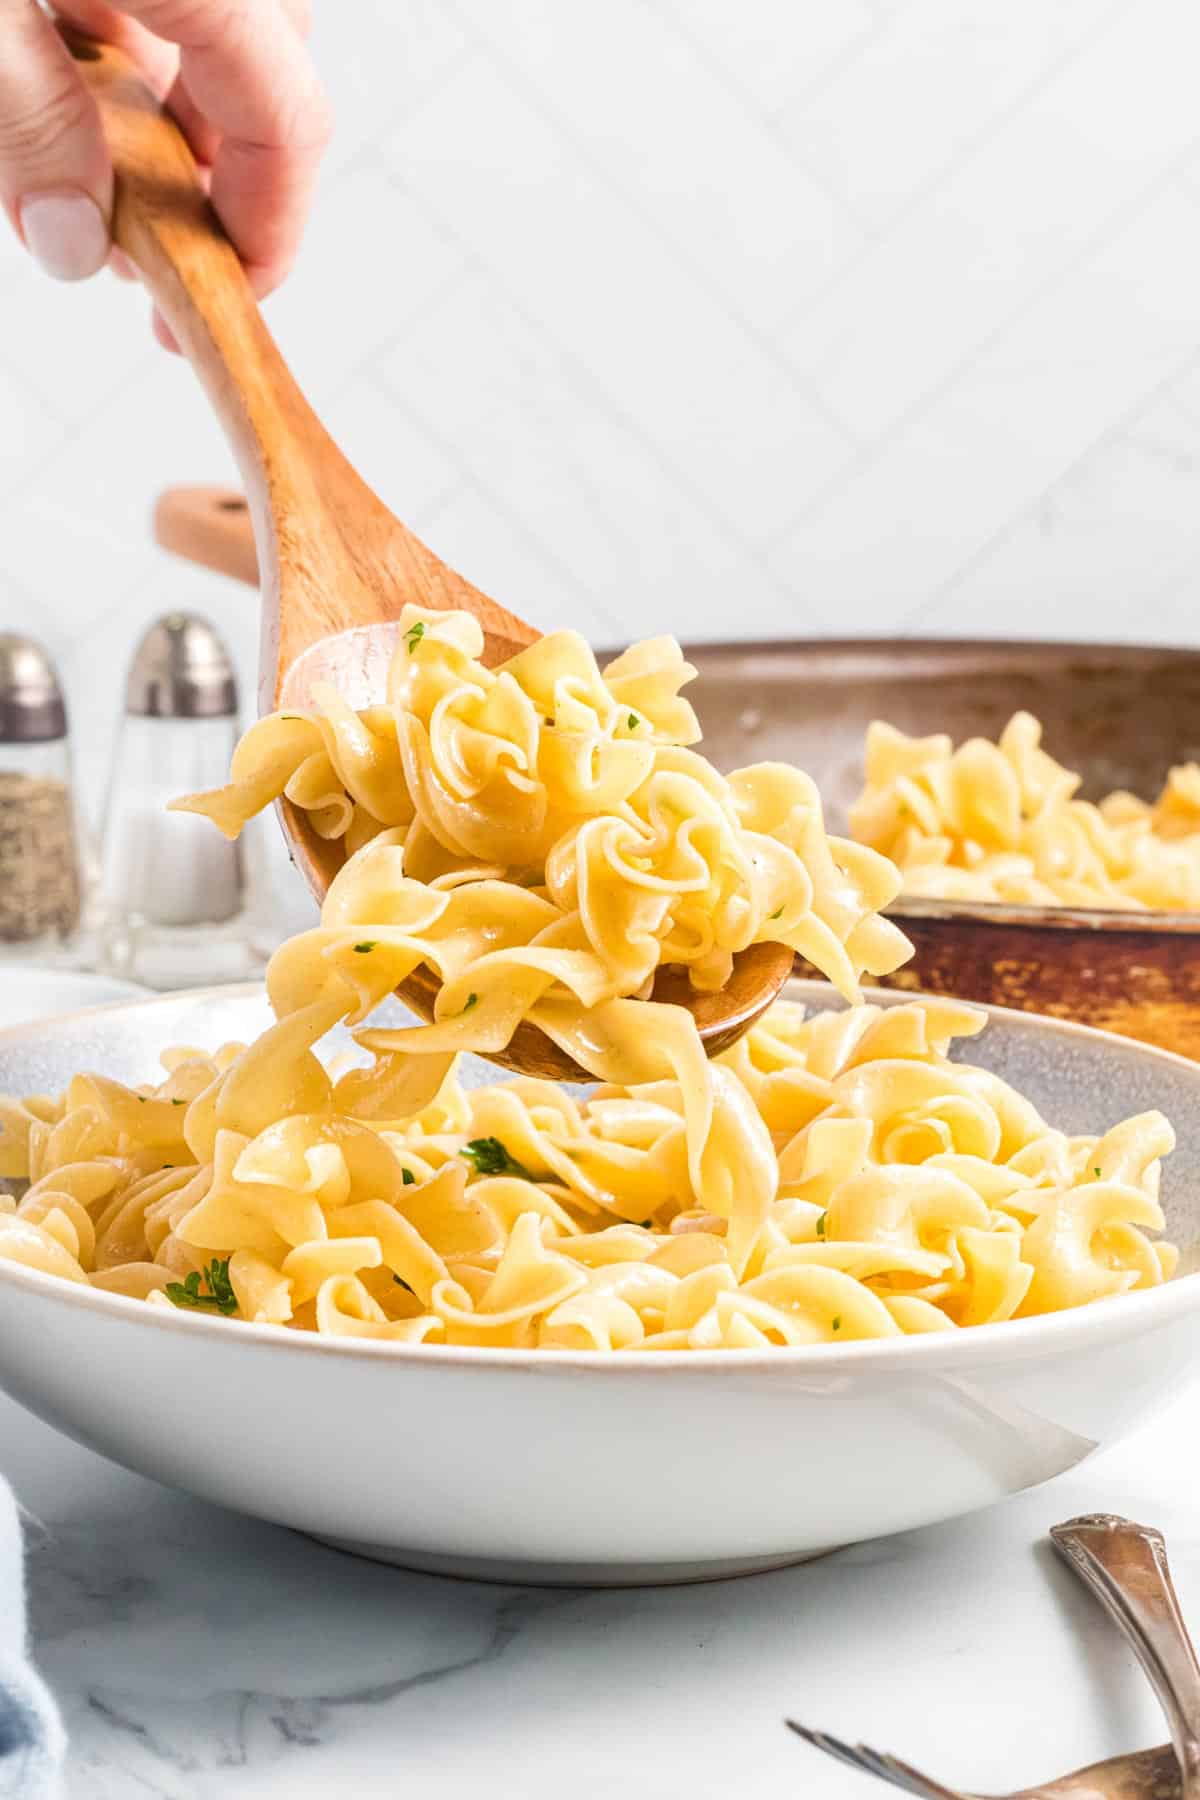 buttered noodles being spooned into a serving bowl.